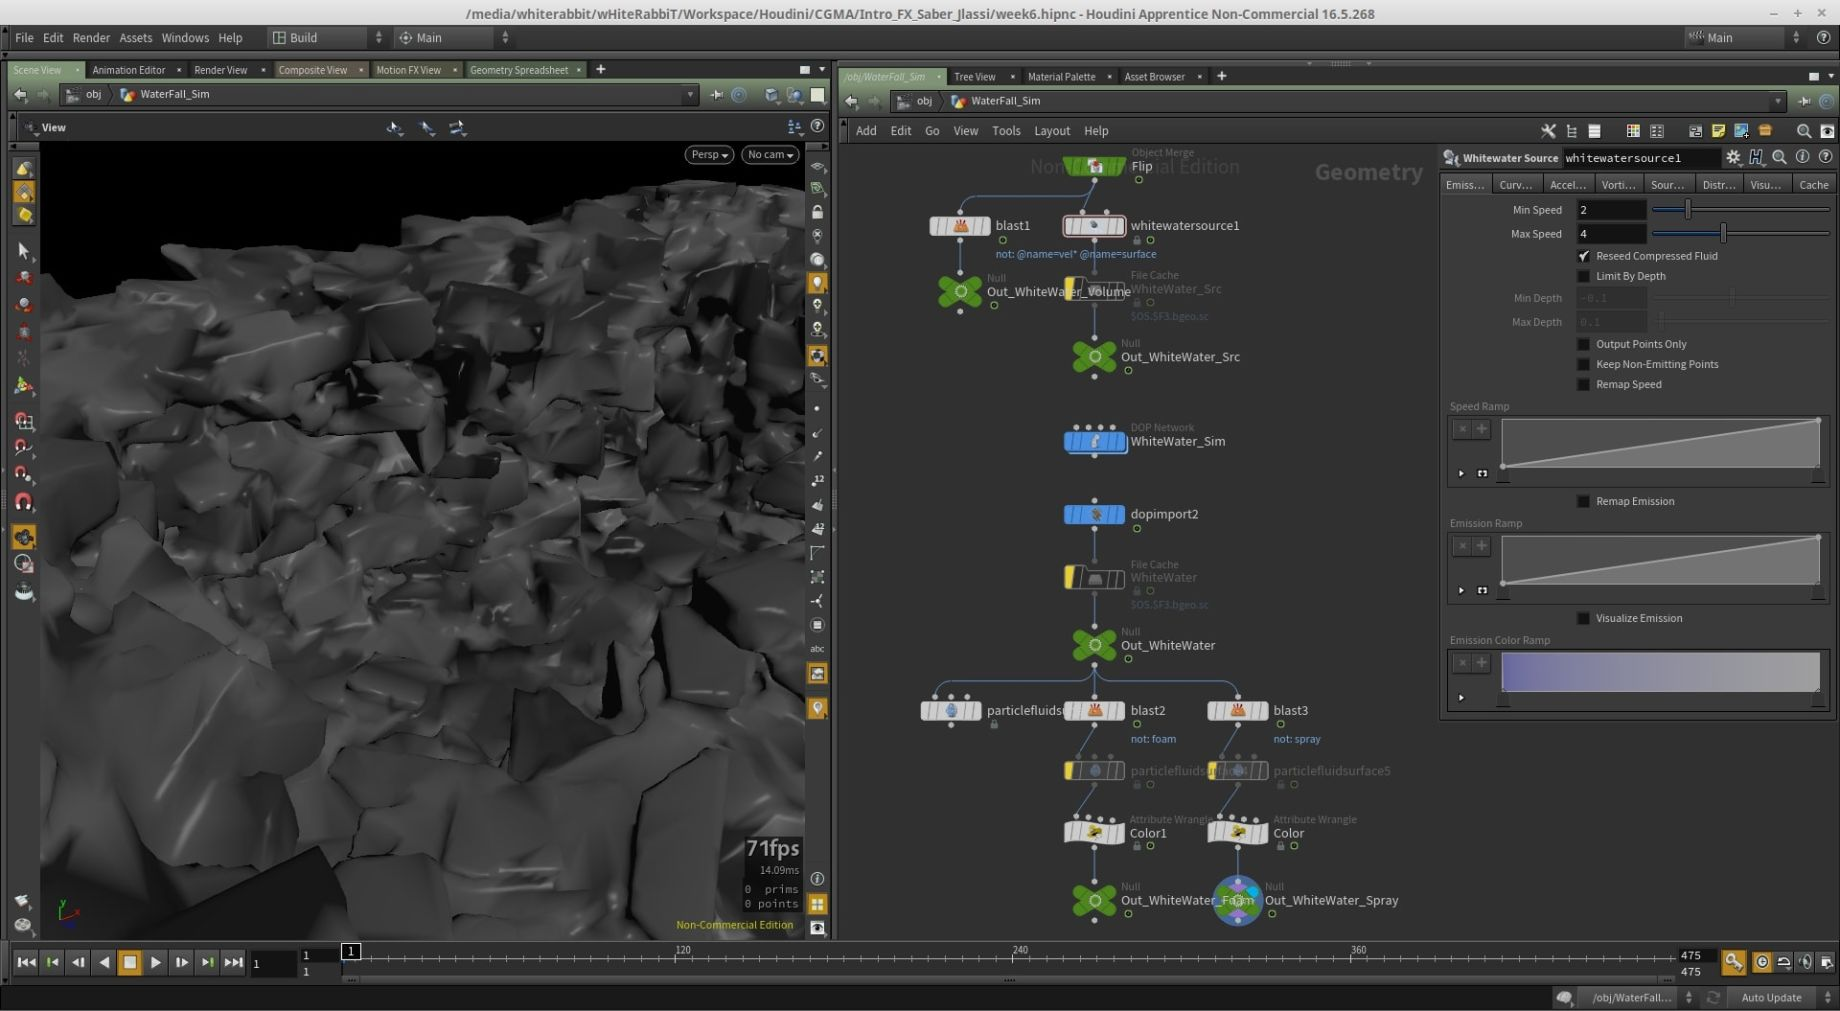 Houdini uses nodes for vfx/simulations